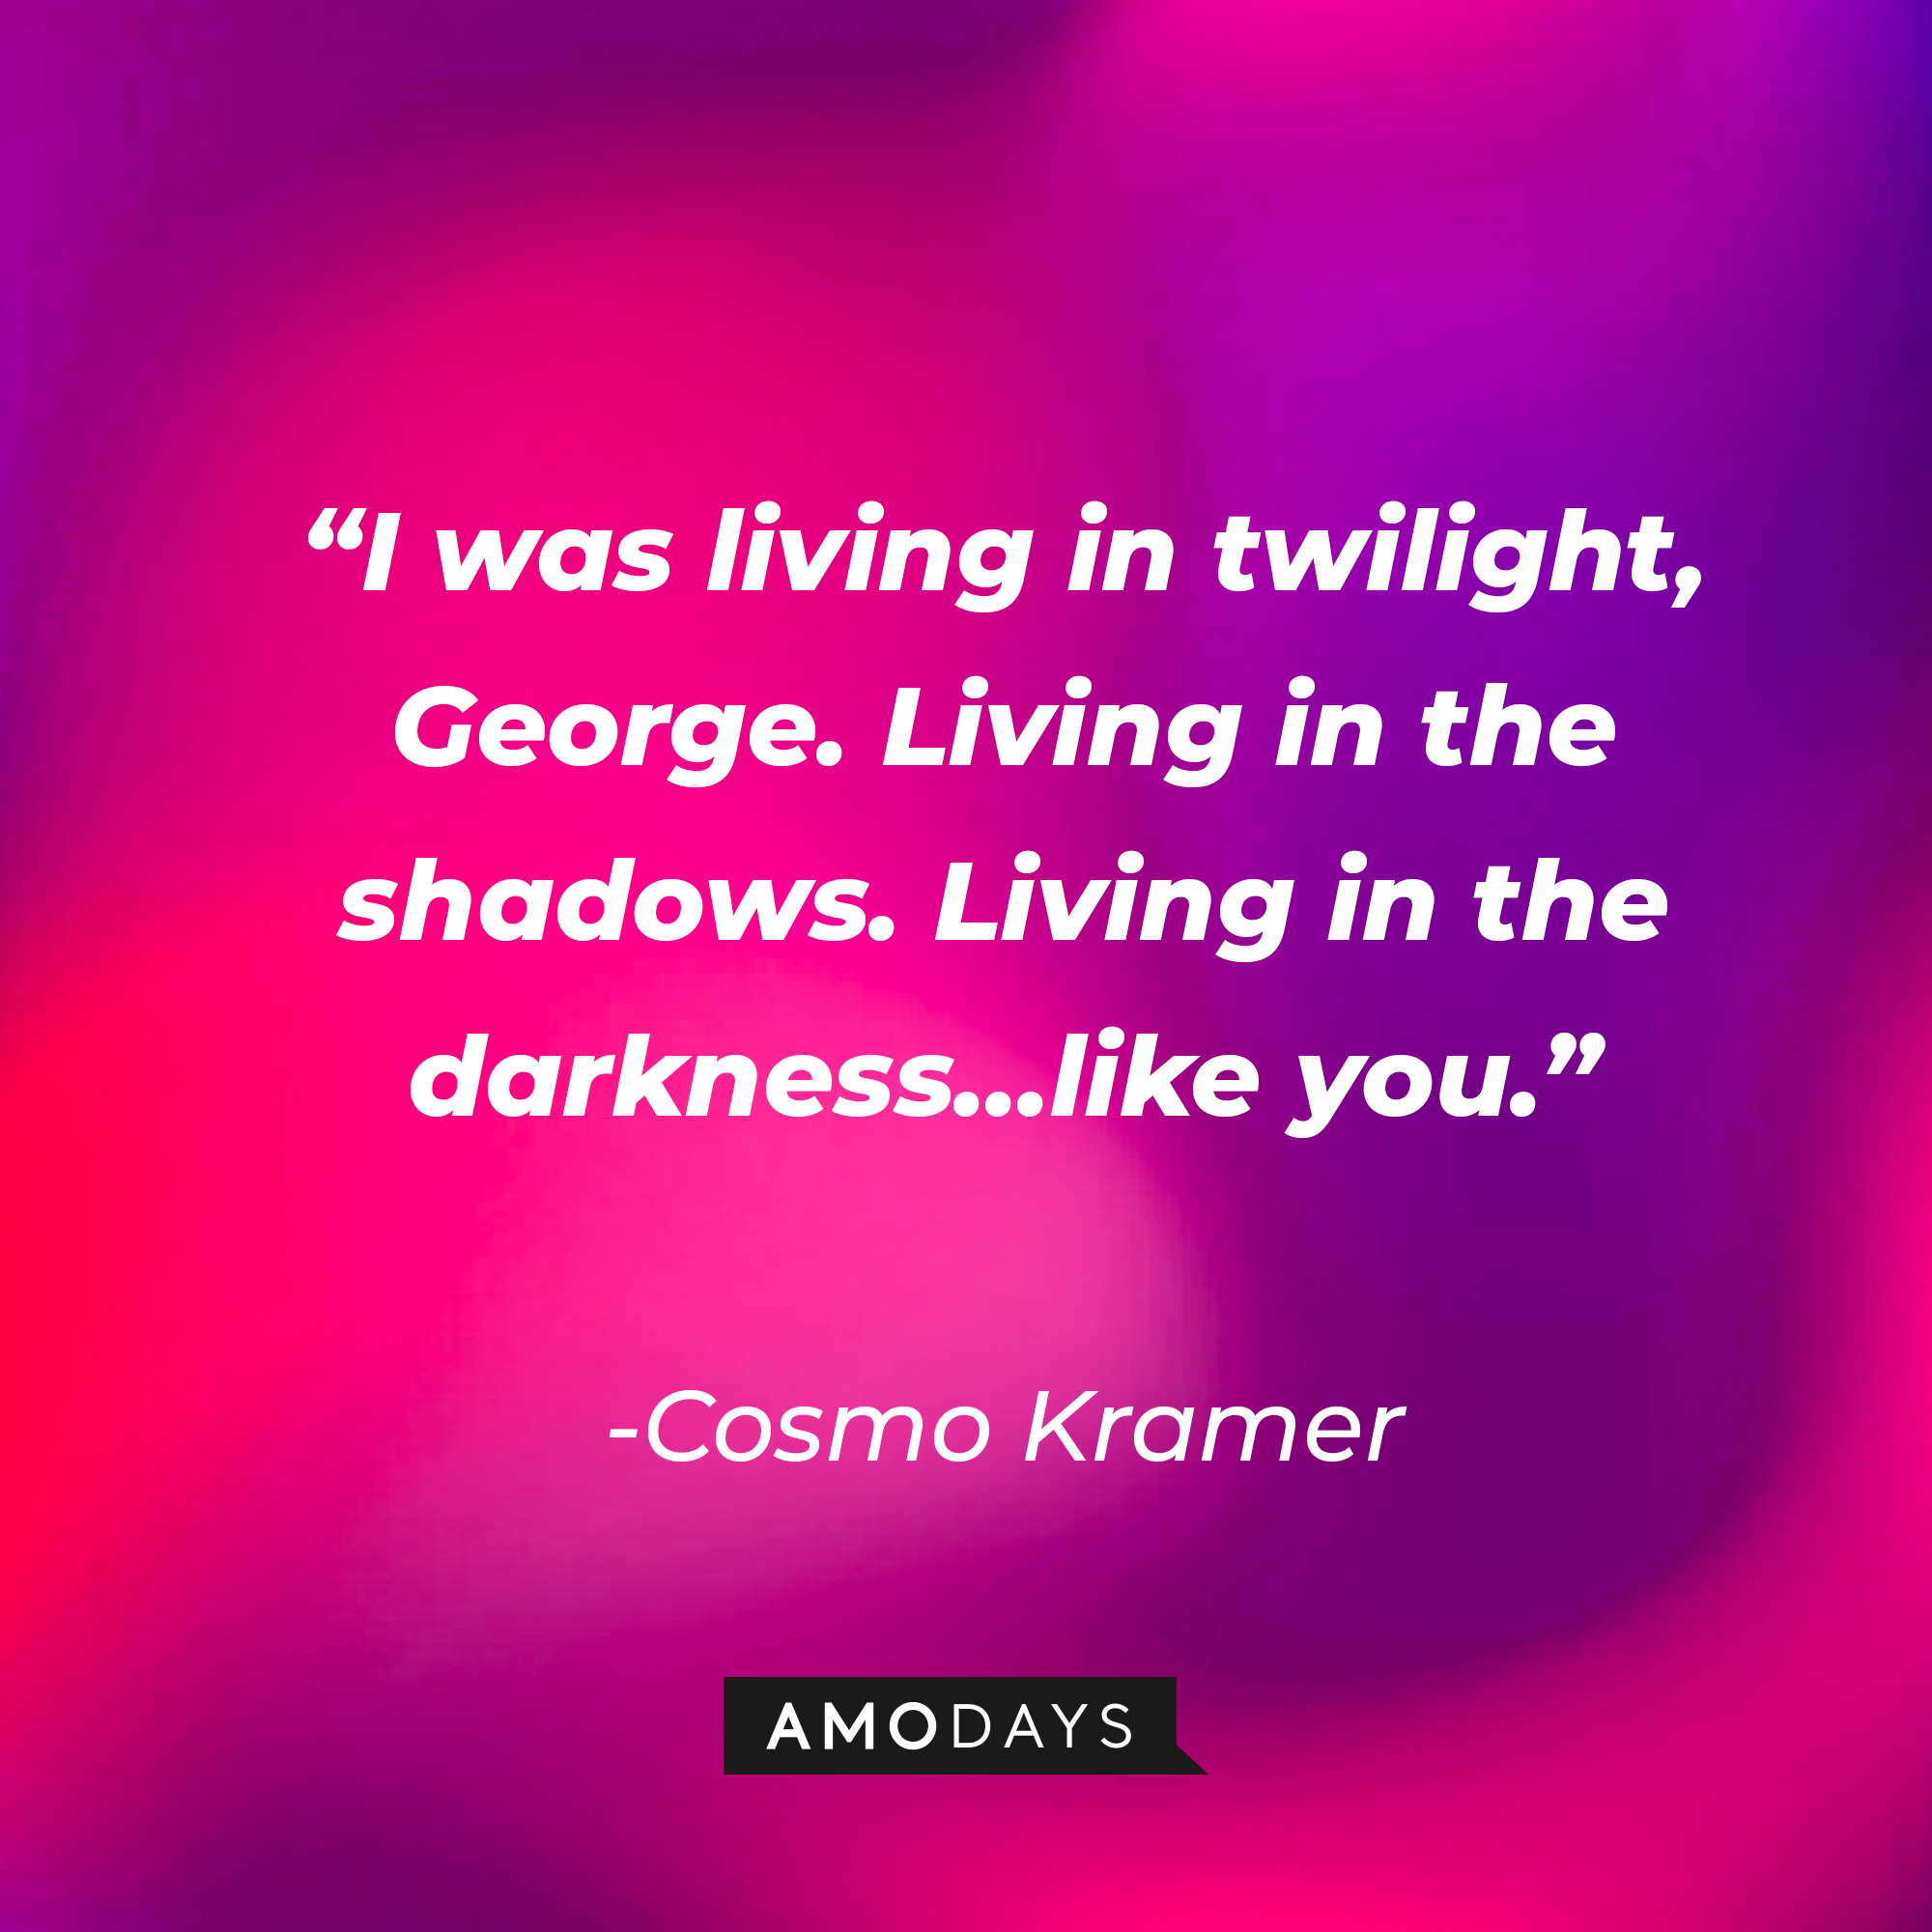 Cosmo Kramer’s quote: “I was living in twilight, George. Living in the shadows. Living in the darkness…like you.”  | Source: AmoDays